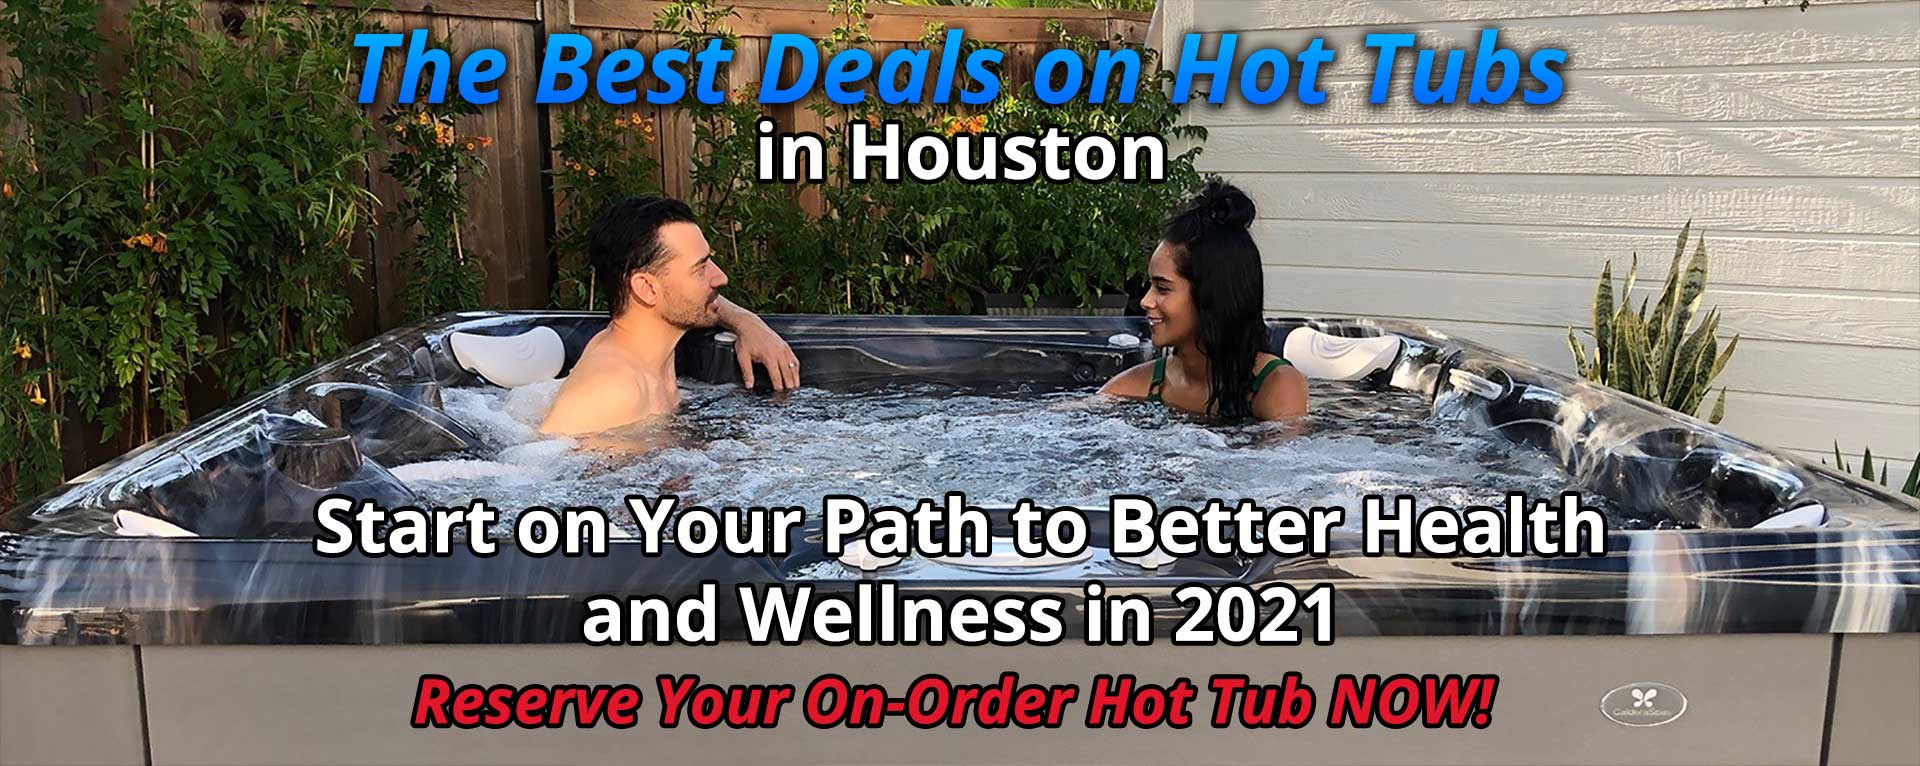 The Best Deals on Hot Tubs in Houston